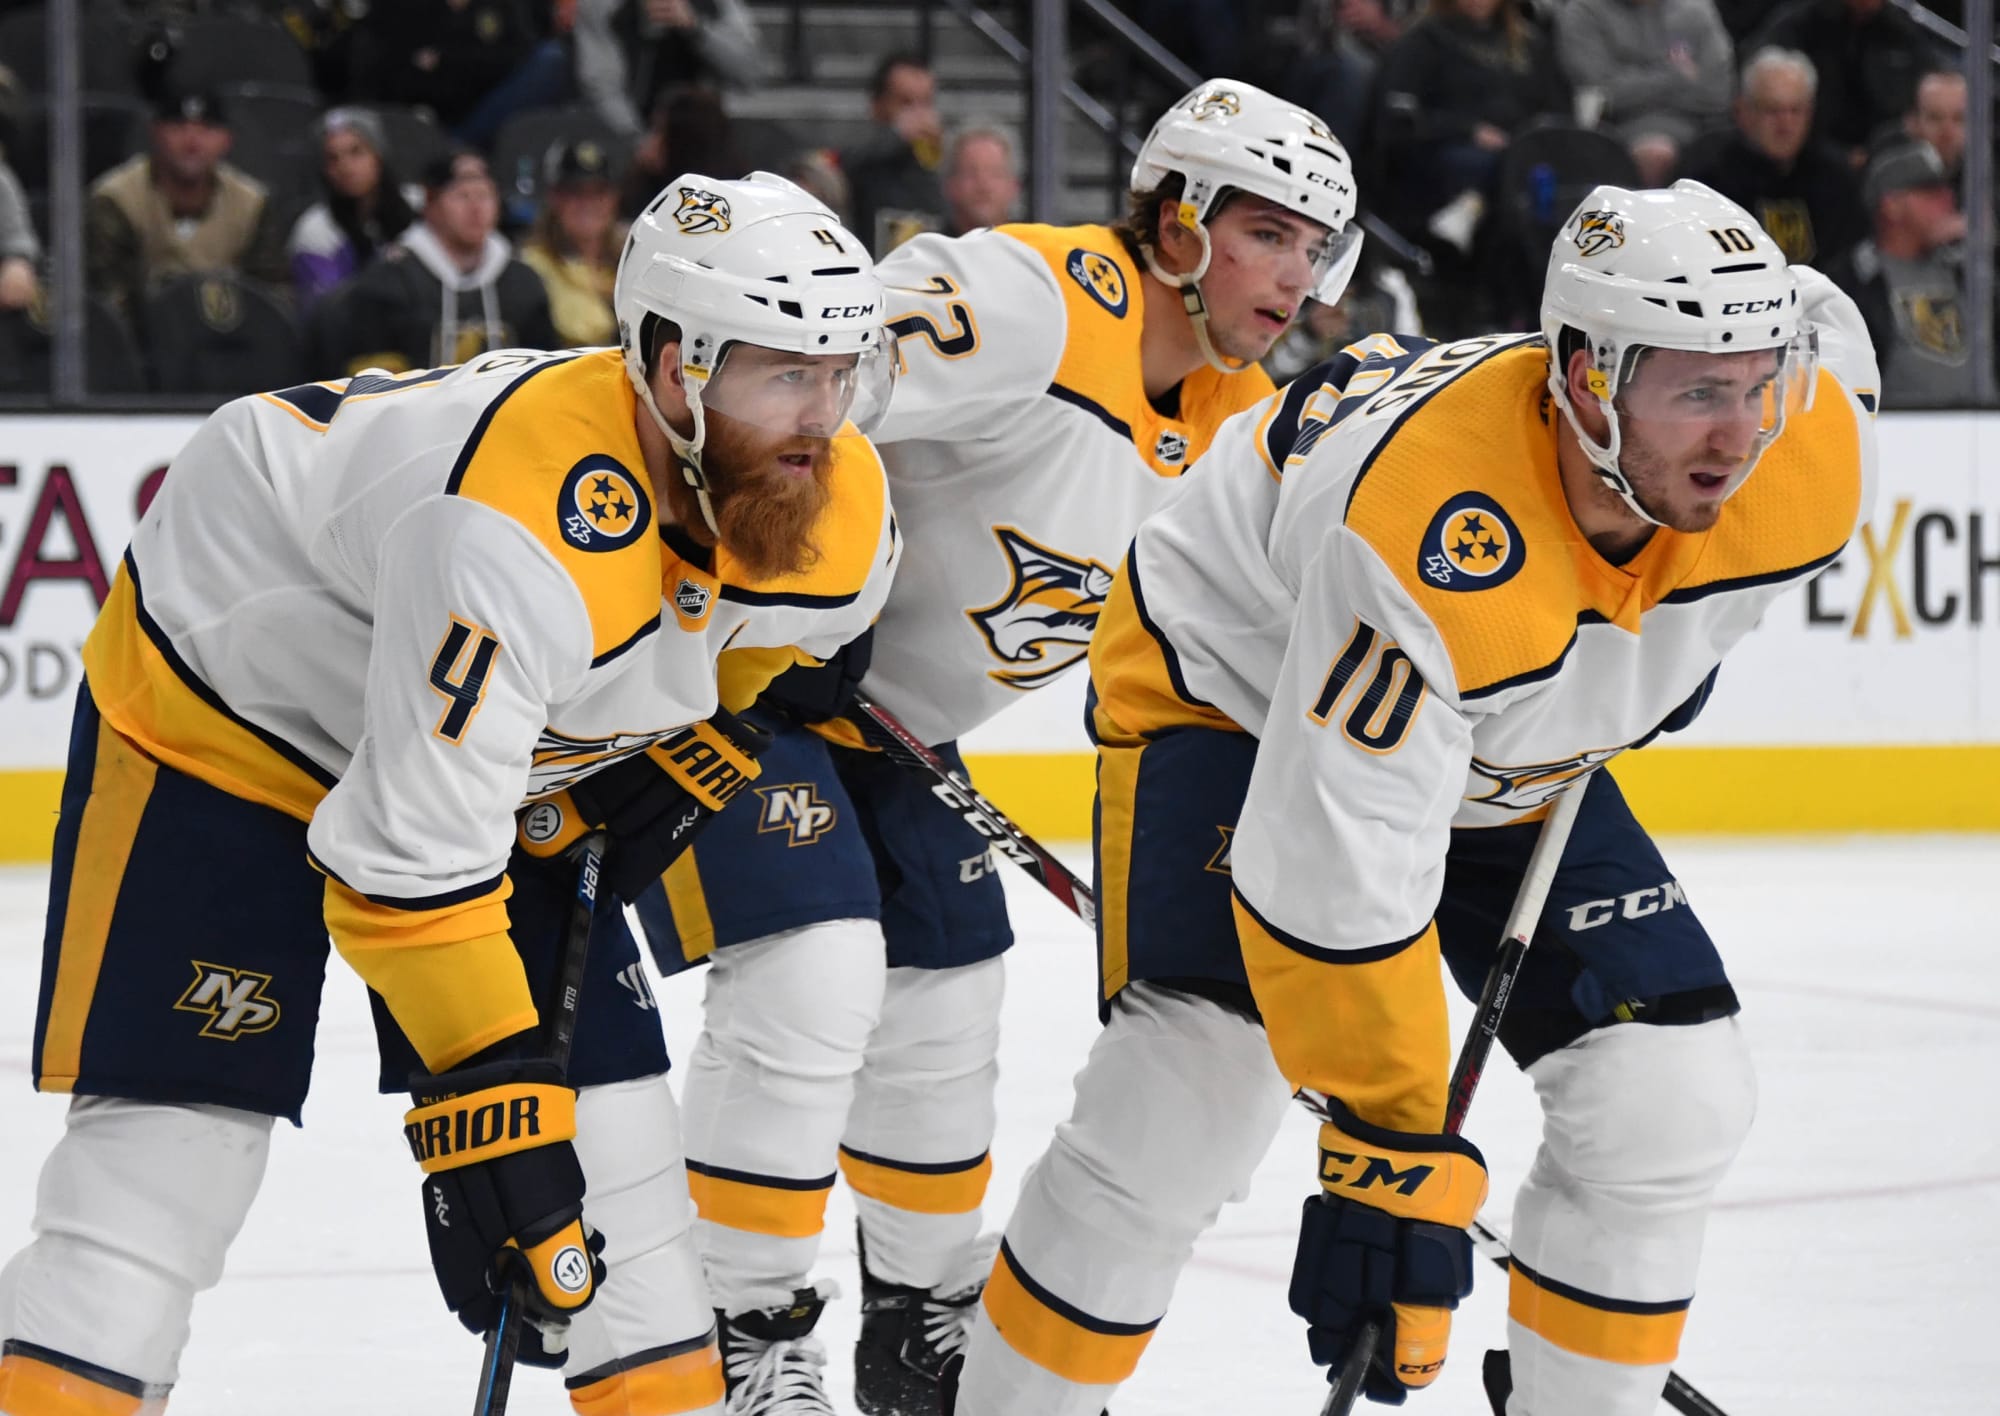 Nashville Predators: A Scary, But True Outlook to Rest of the Season